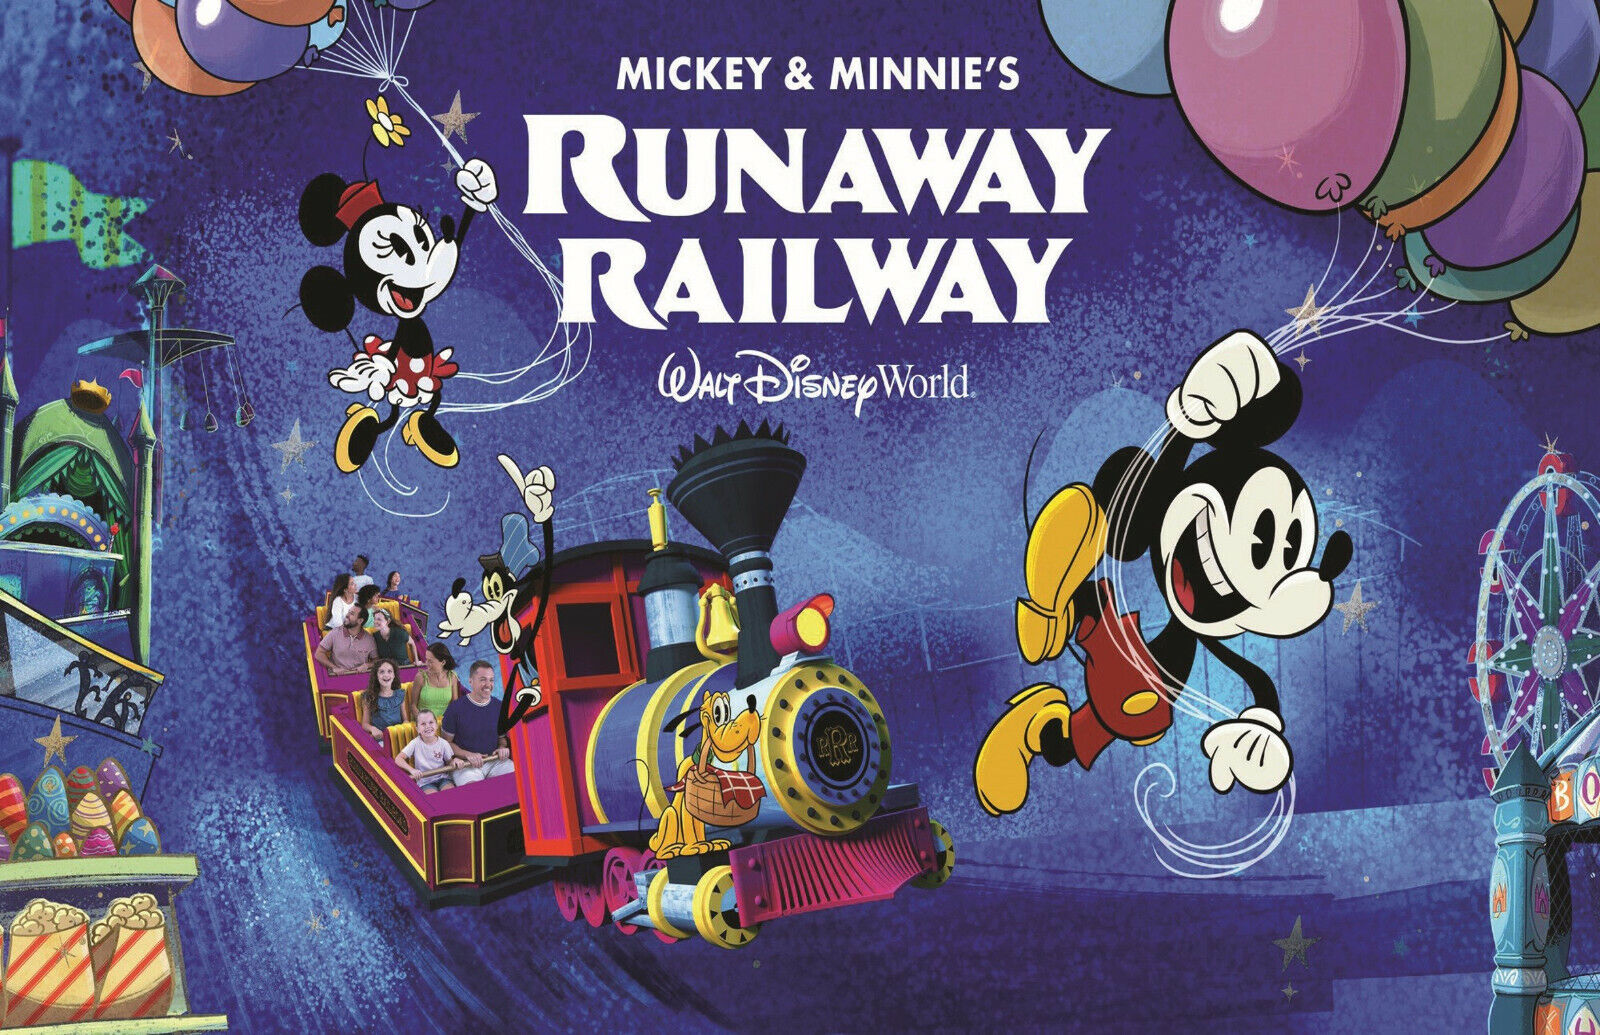 Runaway Railway Up in the Air Lobby Attraction Poster Print 11x17 Mickey Minnie